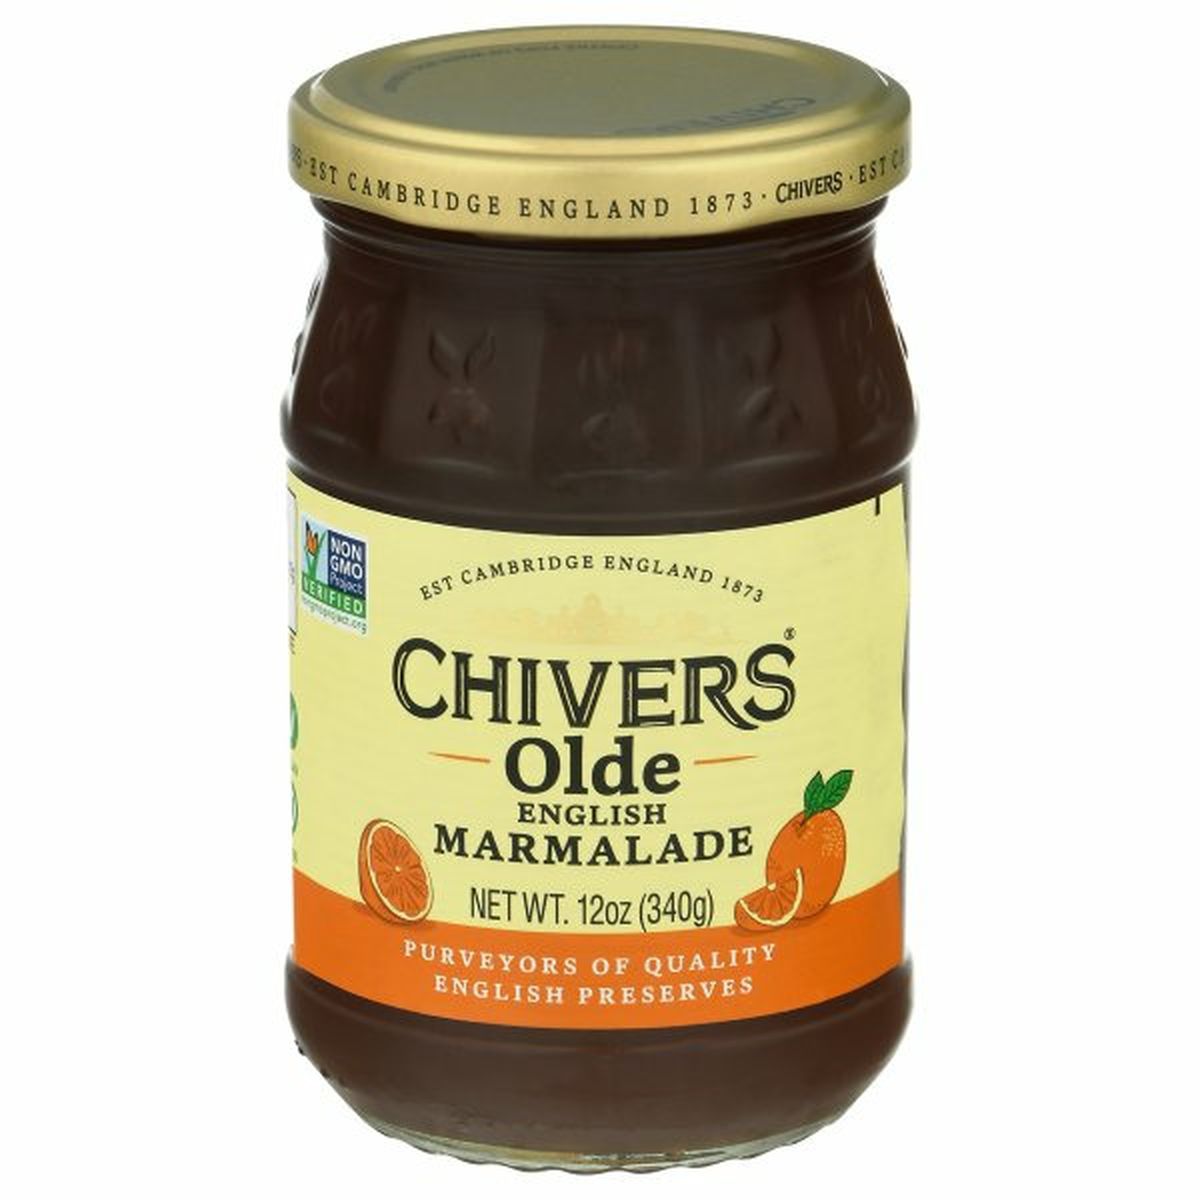 Calories in Chivers Marmalade, English, Olde